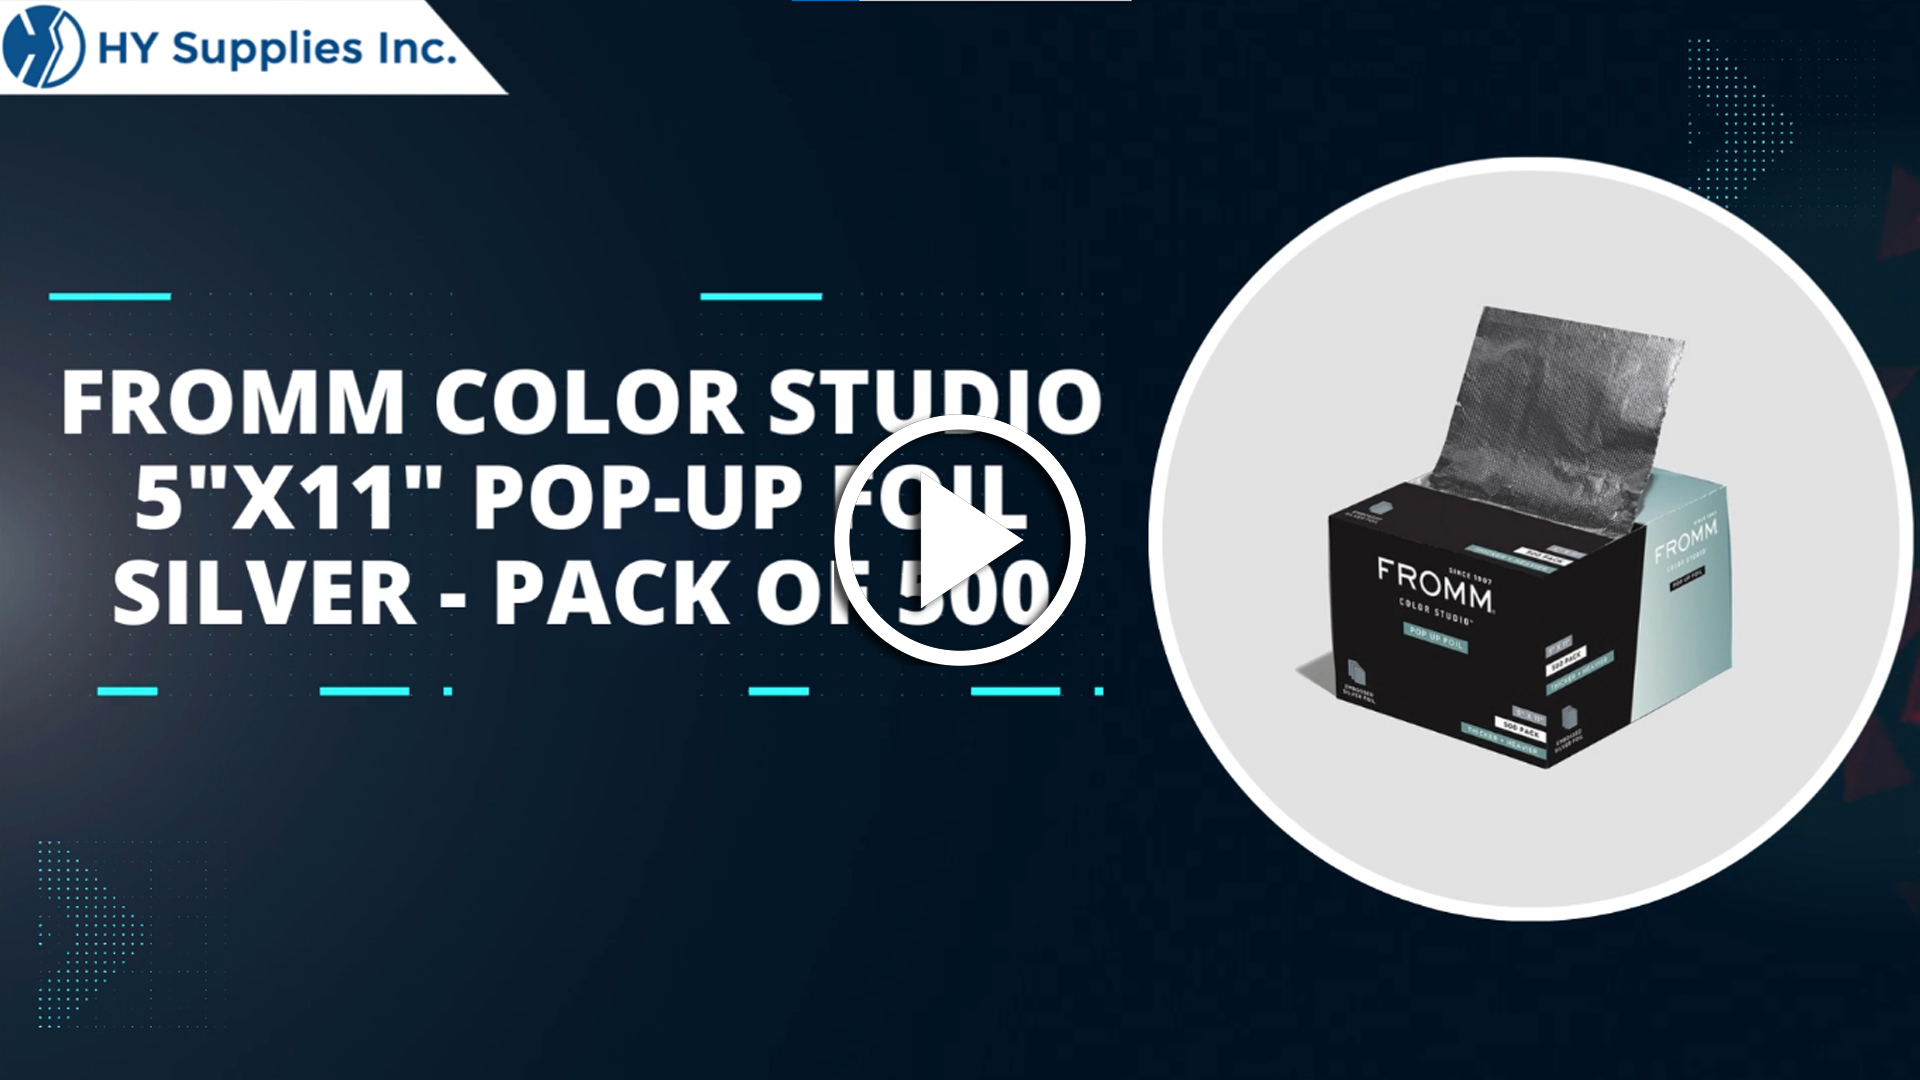 Fromm Color Studio Pop-Up Foil 5” x 11” Silver - Pack of 500